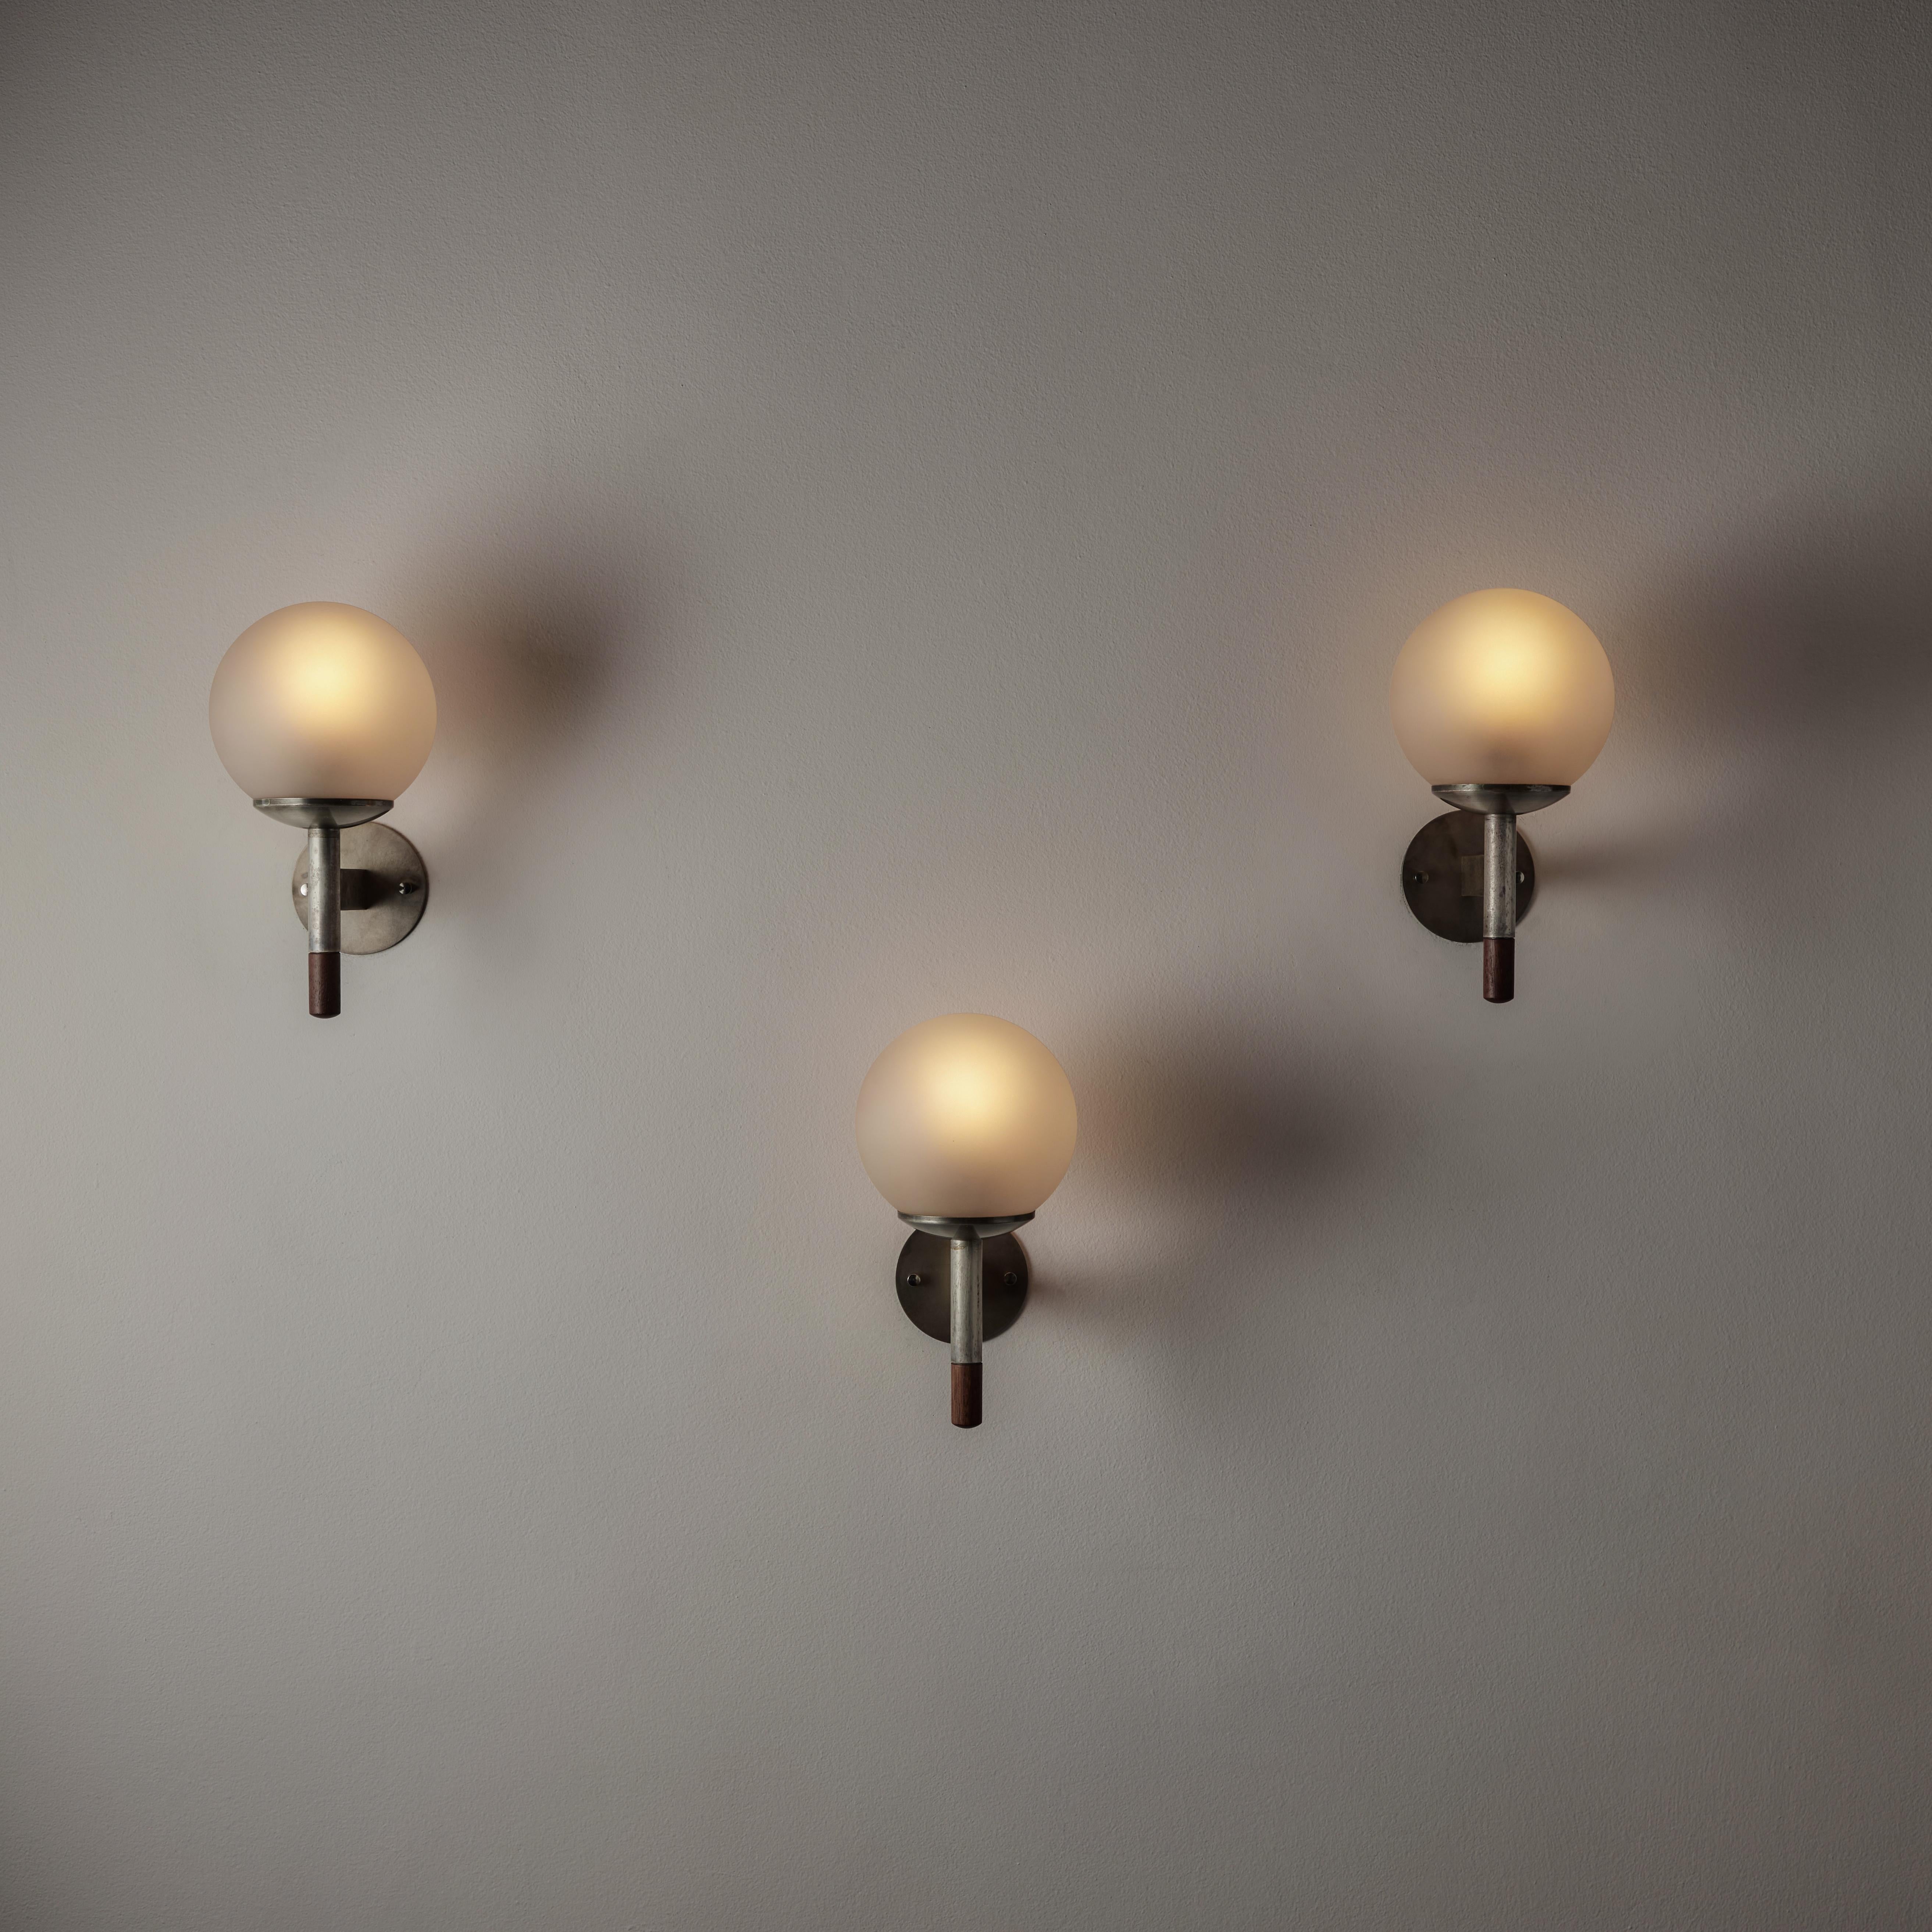 Pair of Arredoluce sconces. Designed and manufactured in Italy, circa the 1950s. Industrial metal stem wall lamps with underside teak caps. Lamps diffuse light through frosted globes that are centered on the metallic and wood torch stem. We